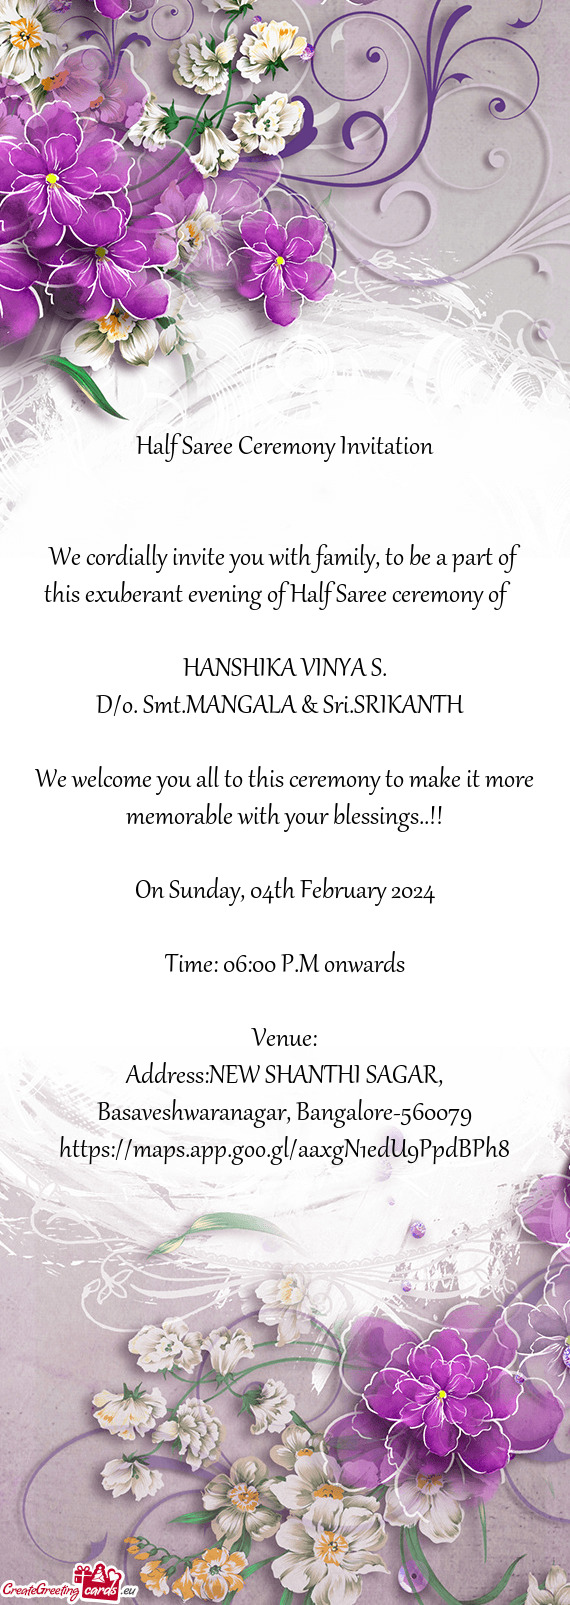 We cordially invite you with family, to be a part of this exuberant evening of Half Saree ceremony o